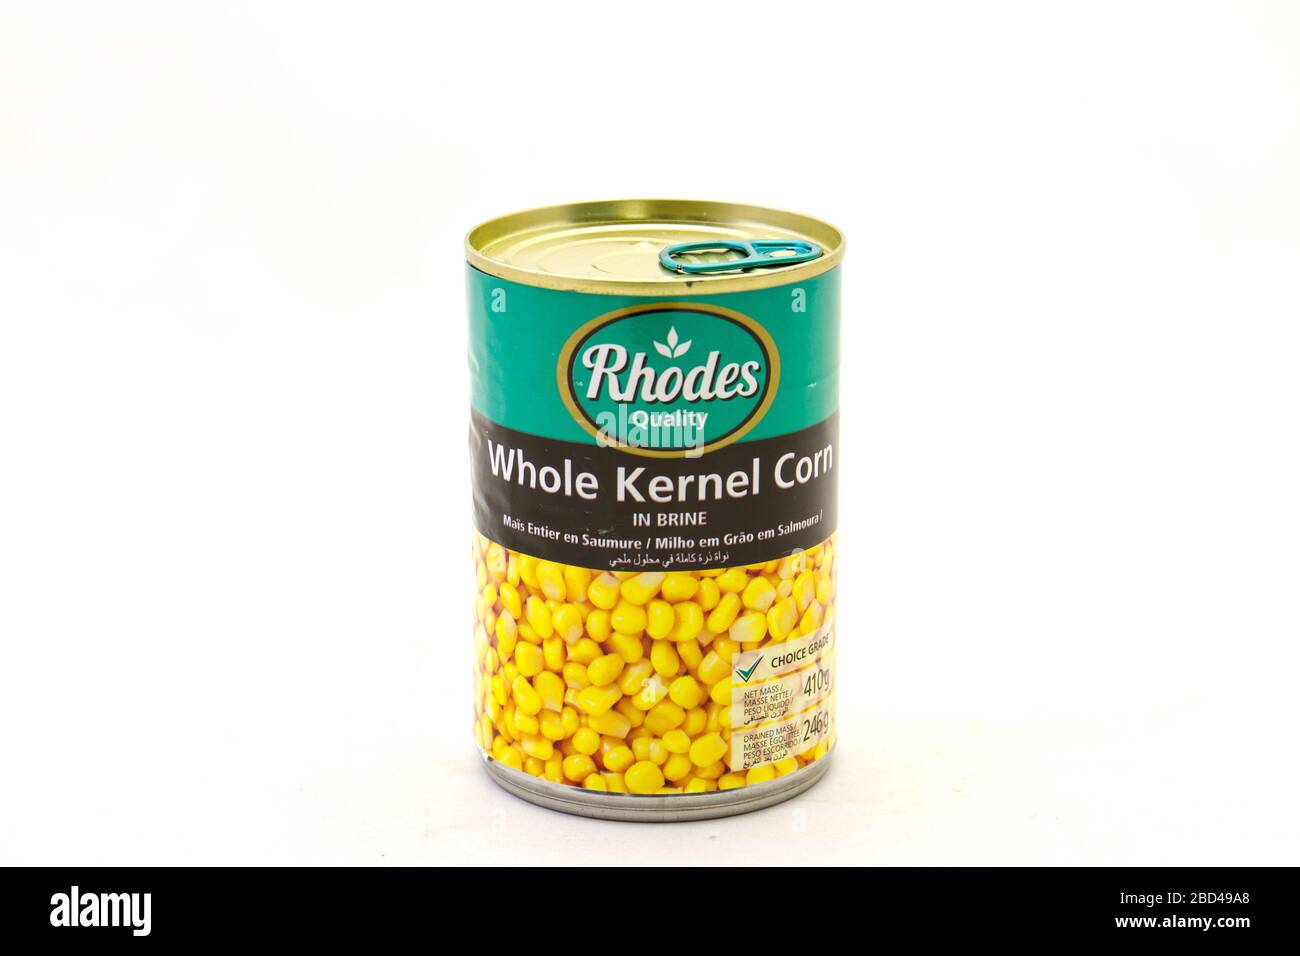 Alberton, South Africa - a can of Rhodes whole kernel corn isolated on a clear background image with copy space in horizontal format Stock Photo